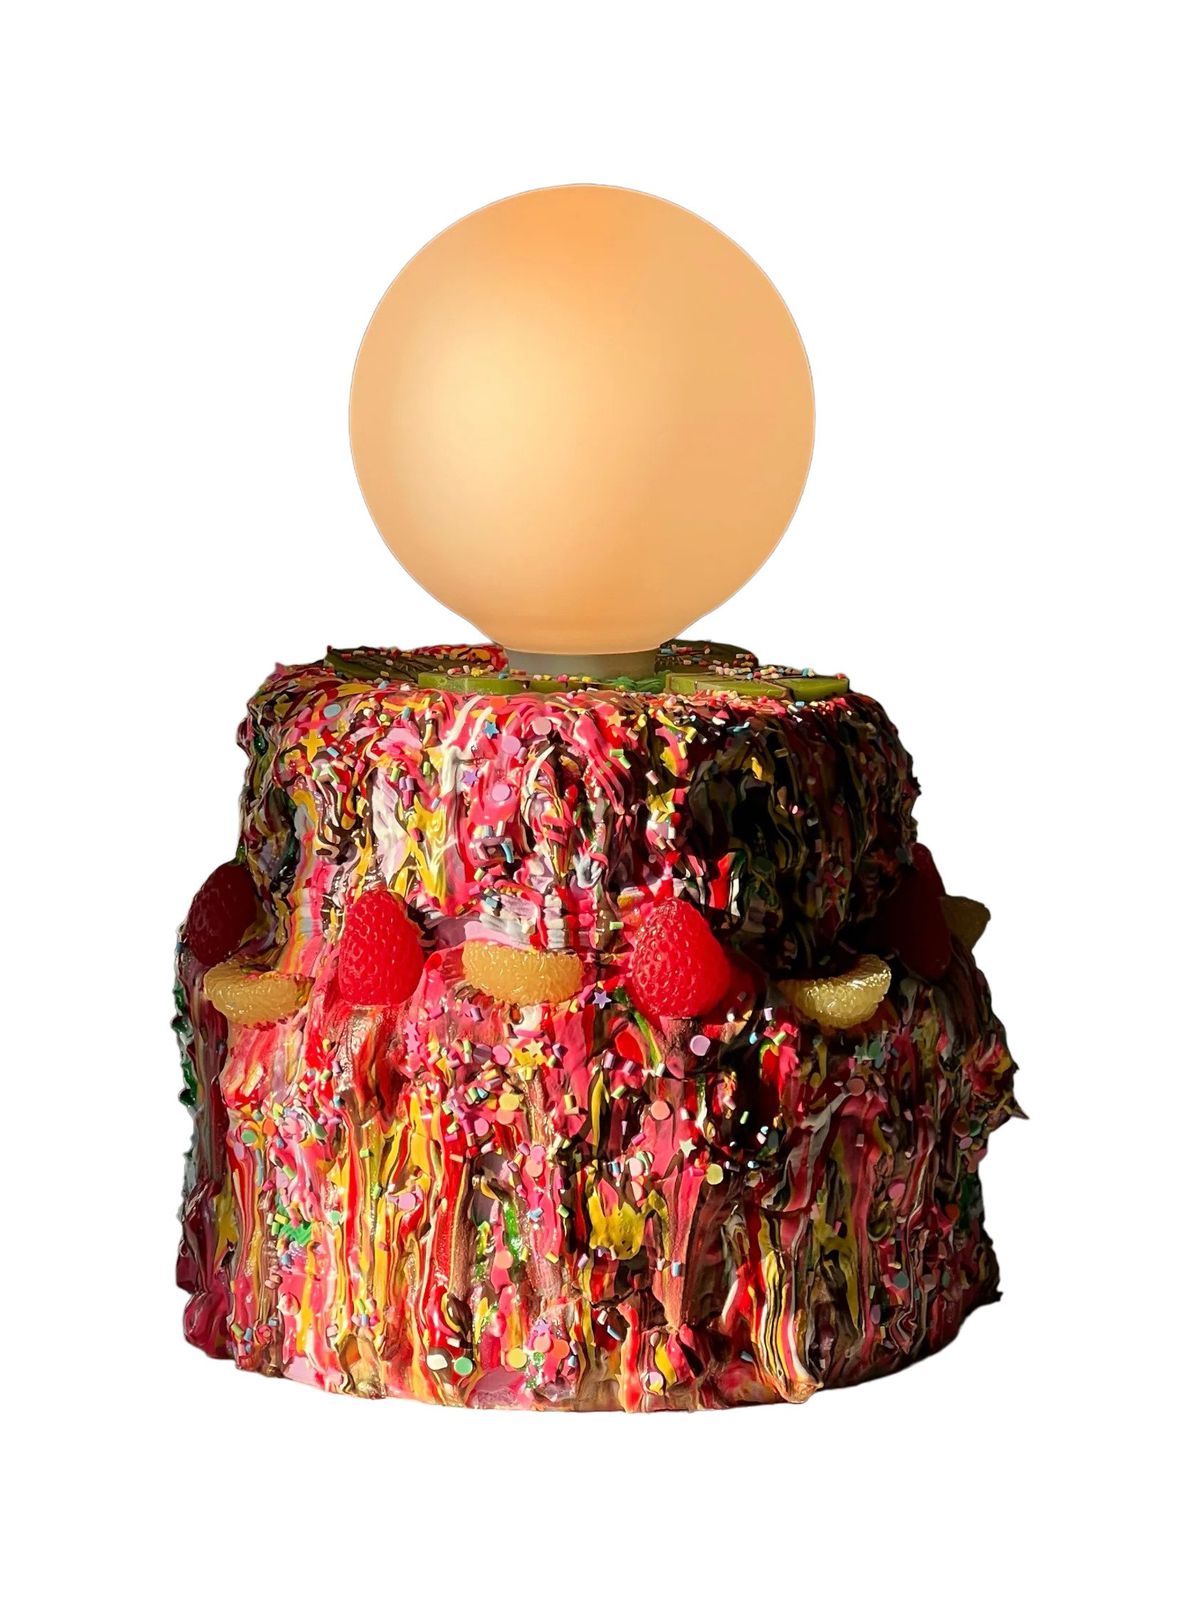 A lamp with a base that looks like a messy cake